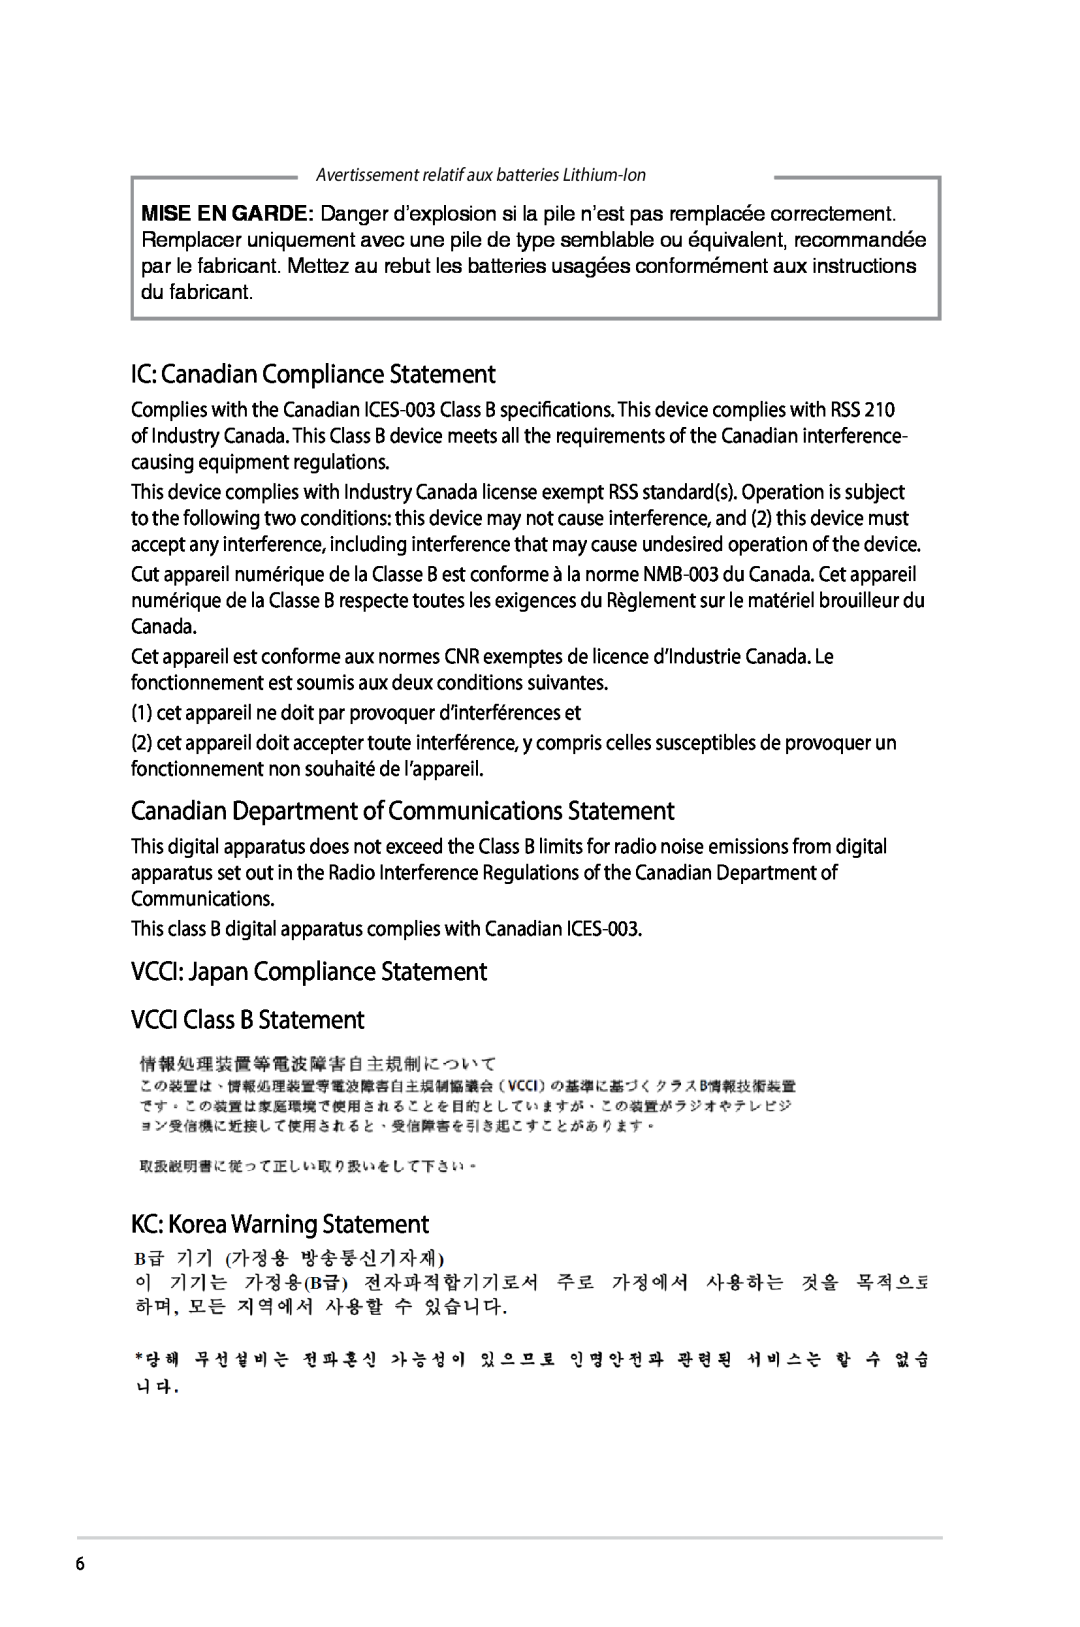 Asus G10AJ IC Canadian Compliance Statement, Canadian Department of Communications Statement, KC Korea Warning Statement 